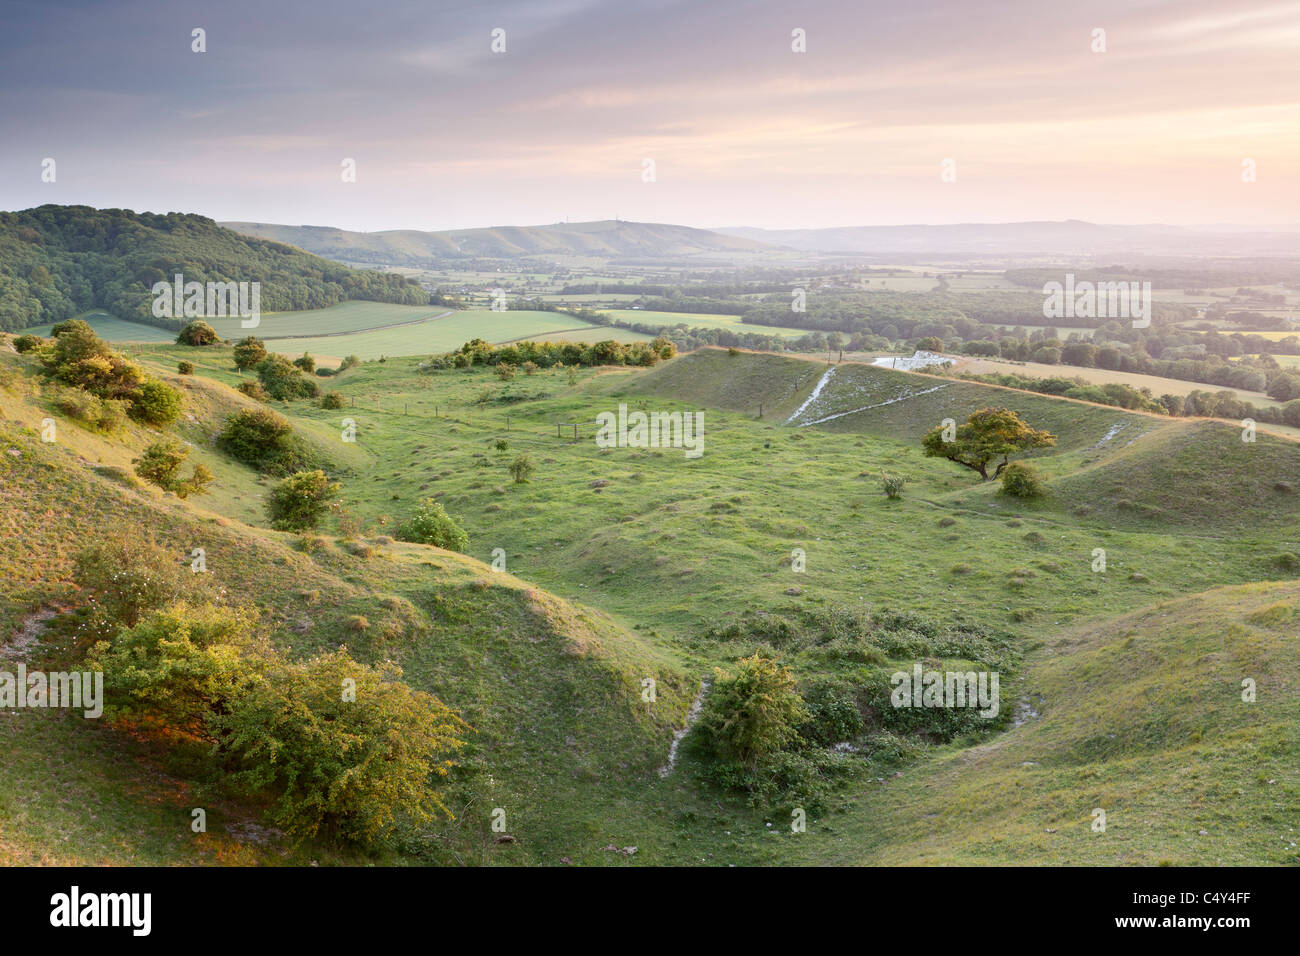 The view across the Low Weald from Wolstonbury Hill. South Downs National Park, West Sussex, England, UK Stock Photo